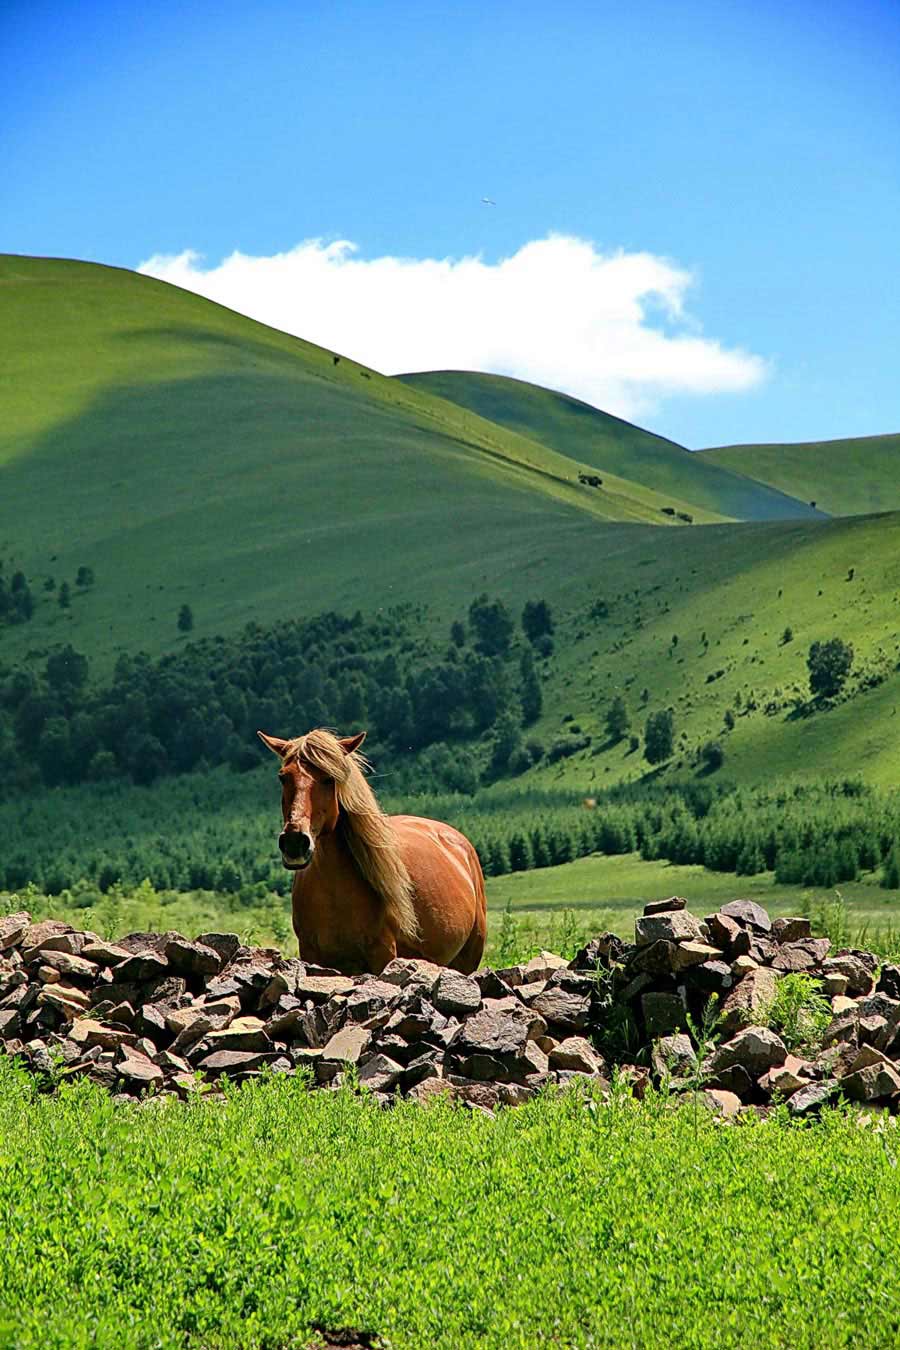 The special climate and geographical position at the junction of the North China Plain and the Inner Mongolia Grasslands give Bashang Grassland its unique natural landscapes and make it a popular destination for tourists and photographers. (China.org.cn)